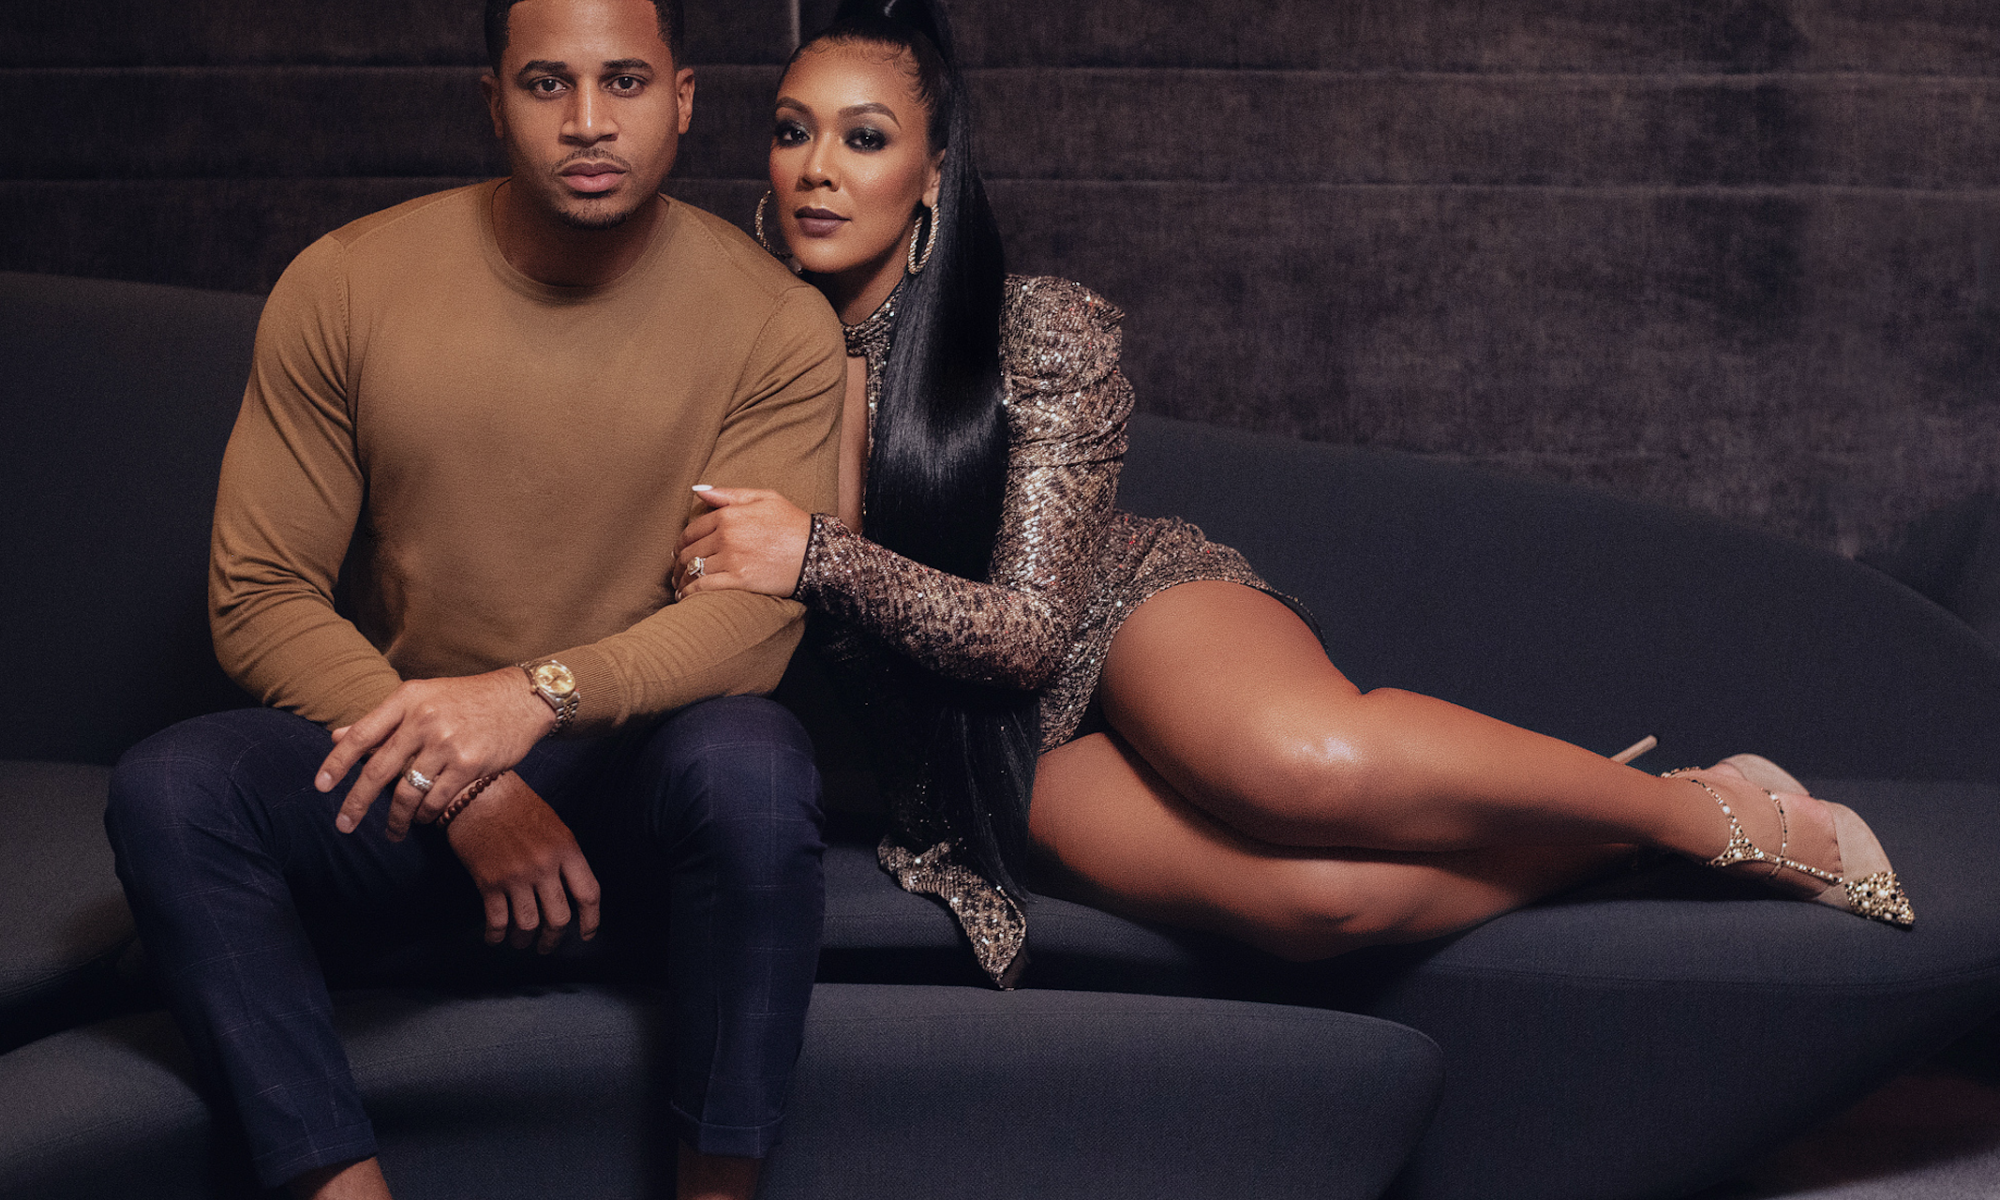 How Black Love Inspired Married Couple Khadeen &amp; Devale Ellis to Build a Digital Dynasty For Their Family